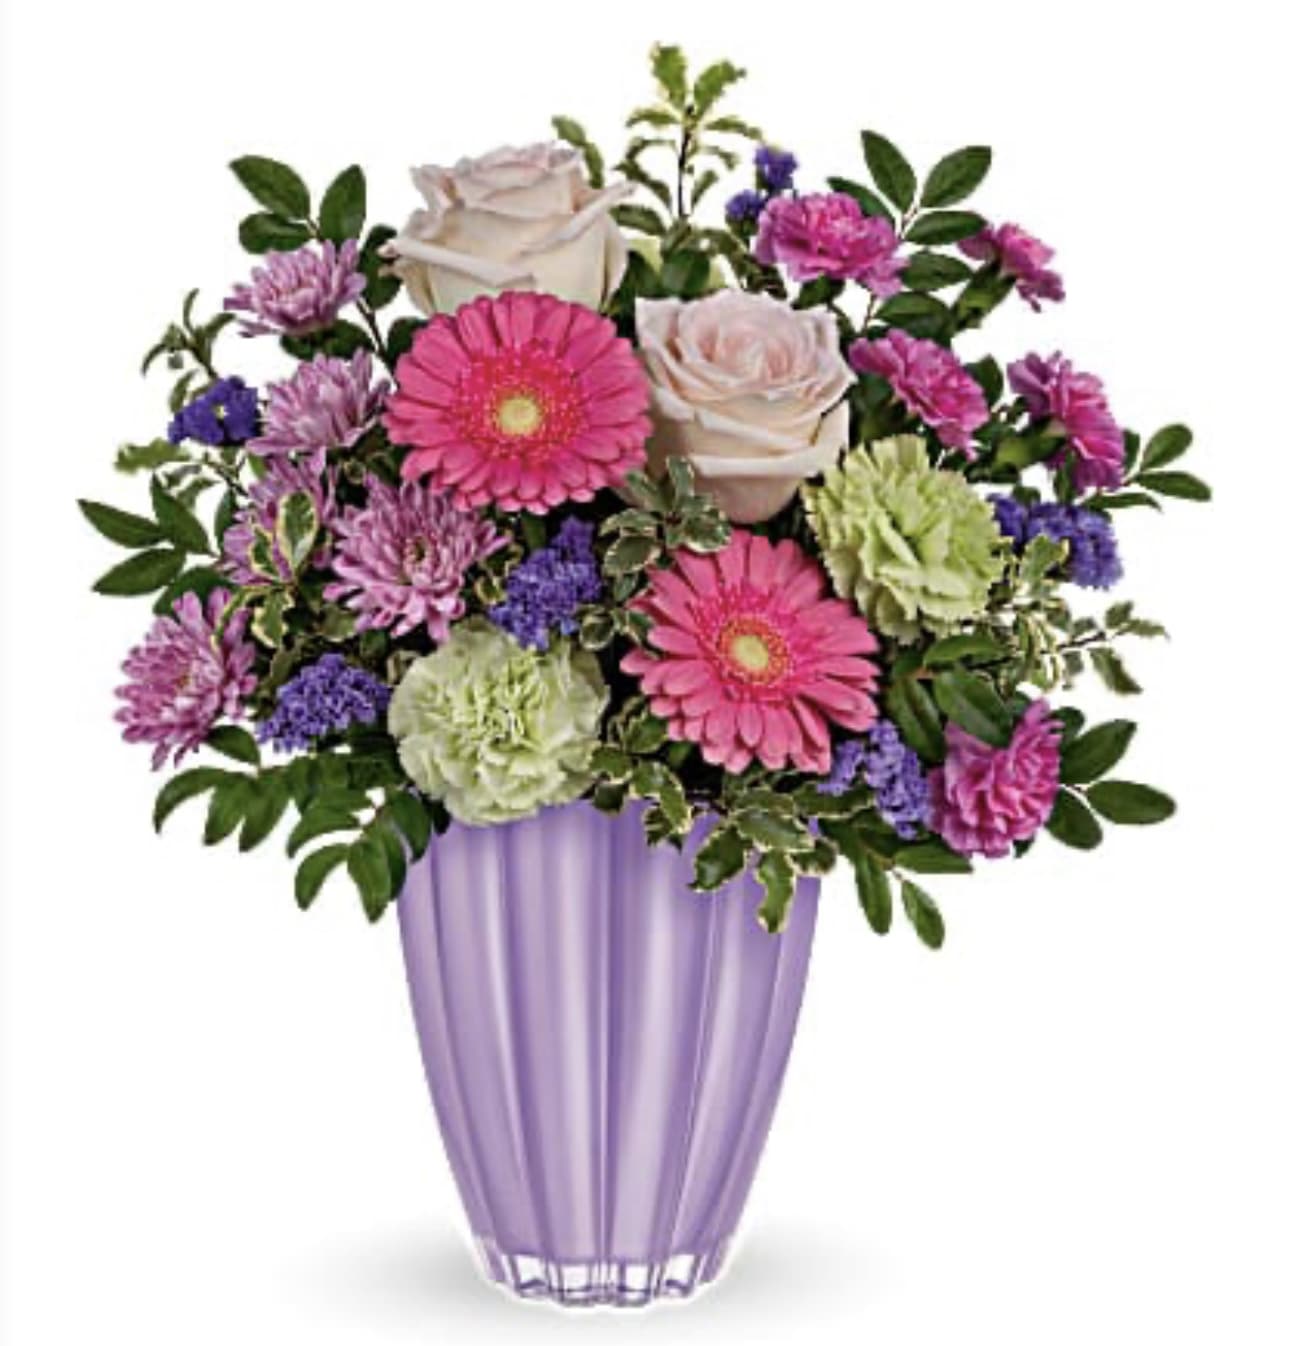 Playful Pastel Bouquet - European glass vase presents a playful bouquet of roses and gerbers